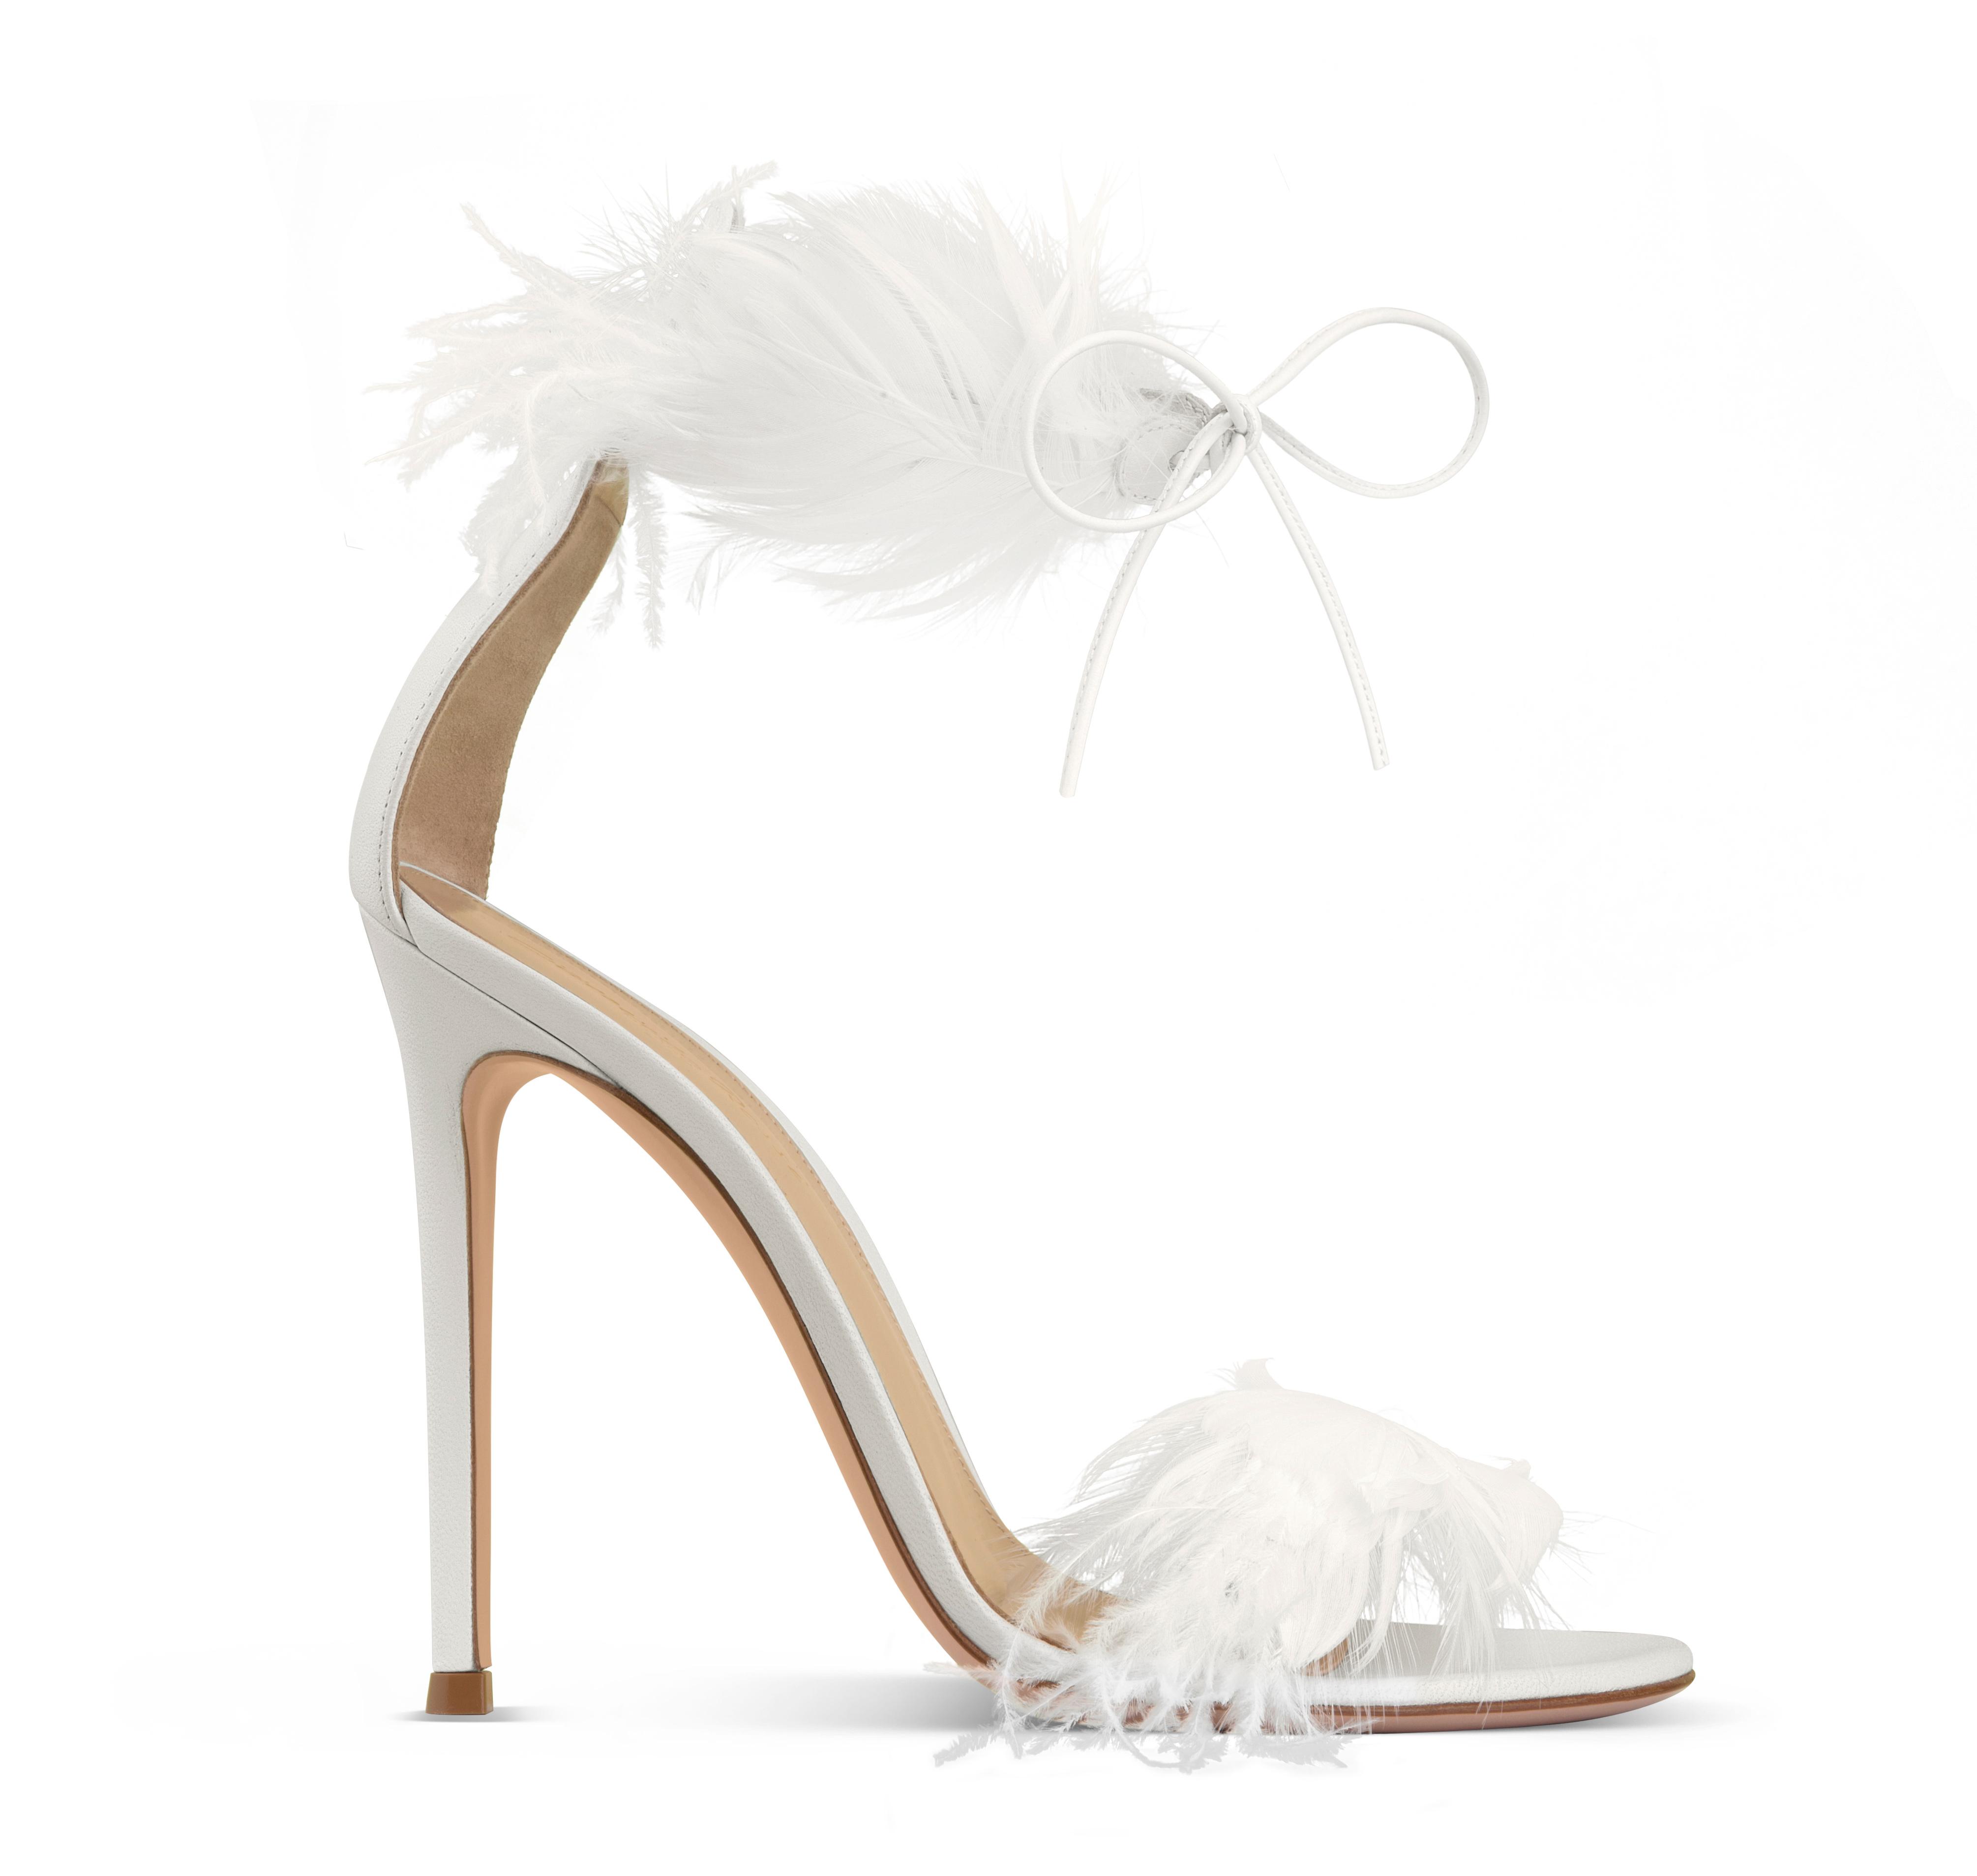 Delicate white feathers enrich the ankle strap and toe band of the Athena sandal. Finished with a 105mm stiletto heel, is showcased further with tone-on-tone feathers.